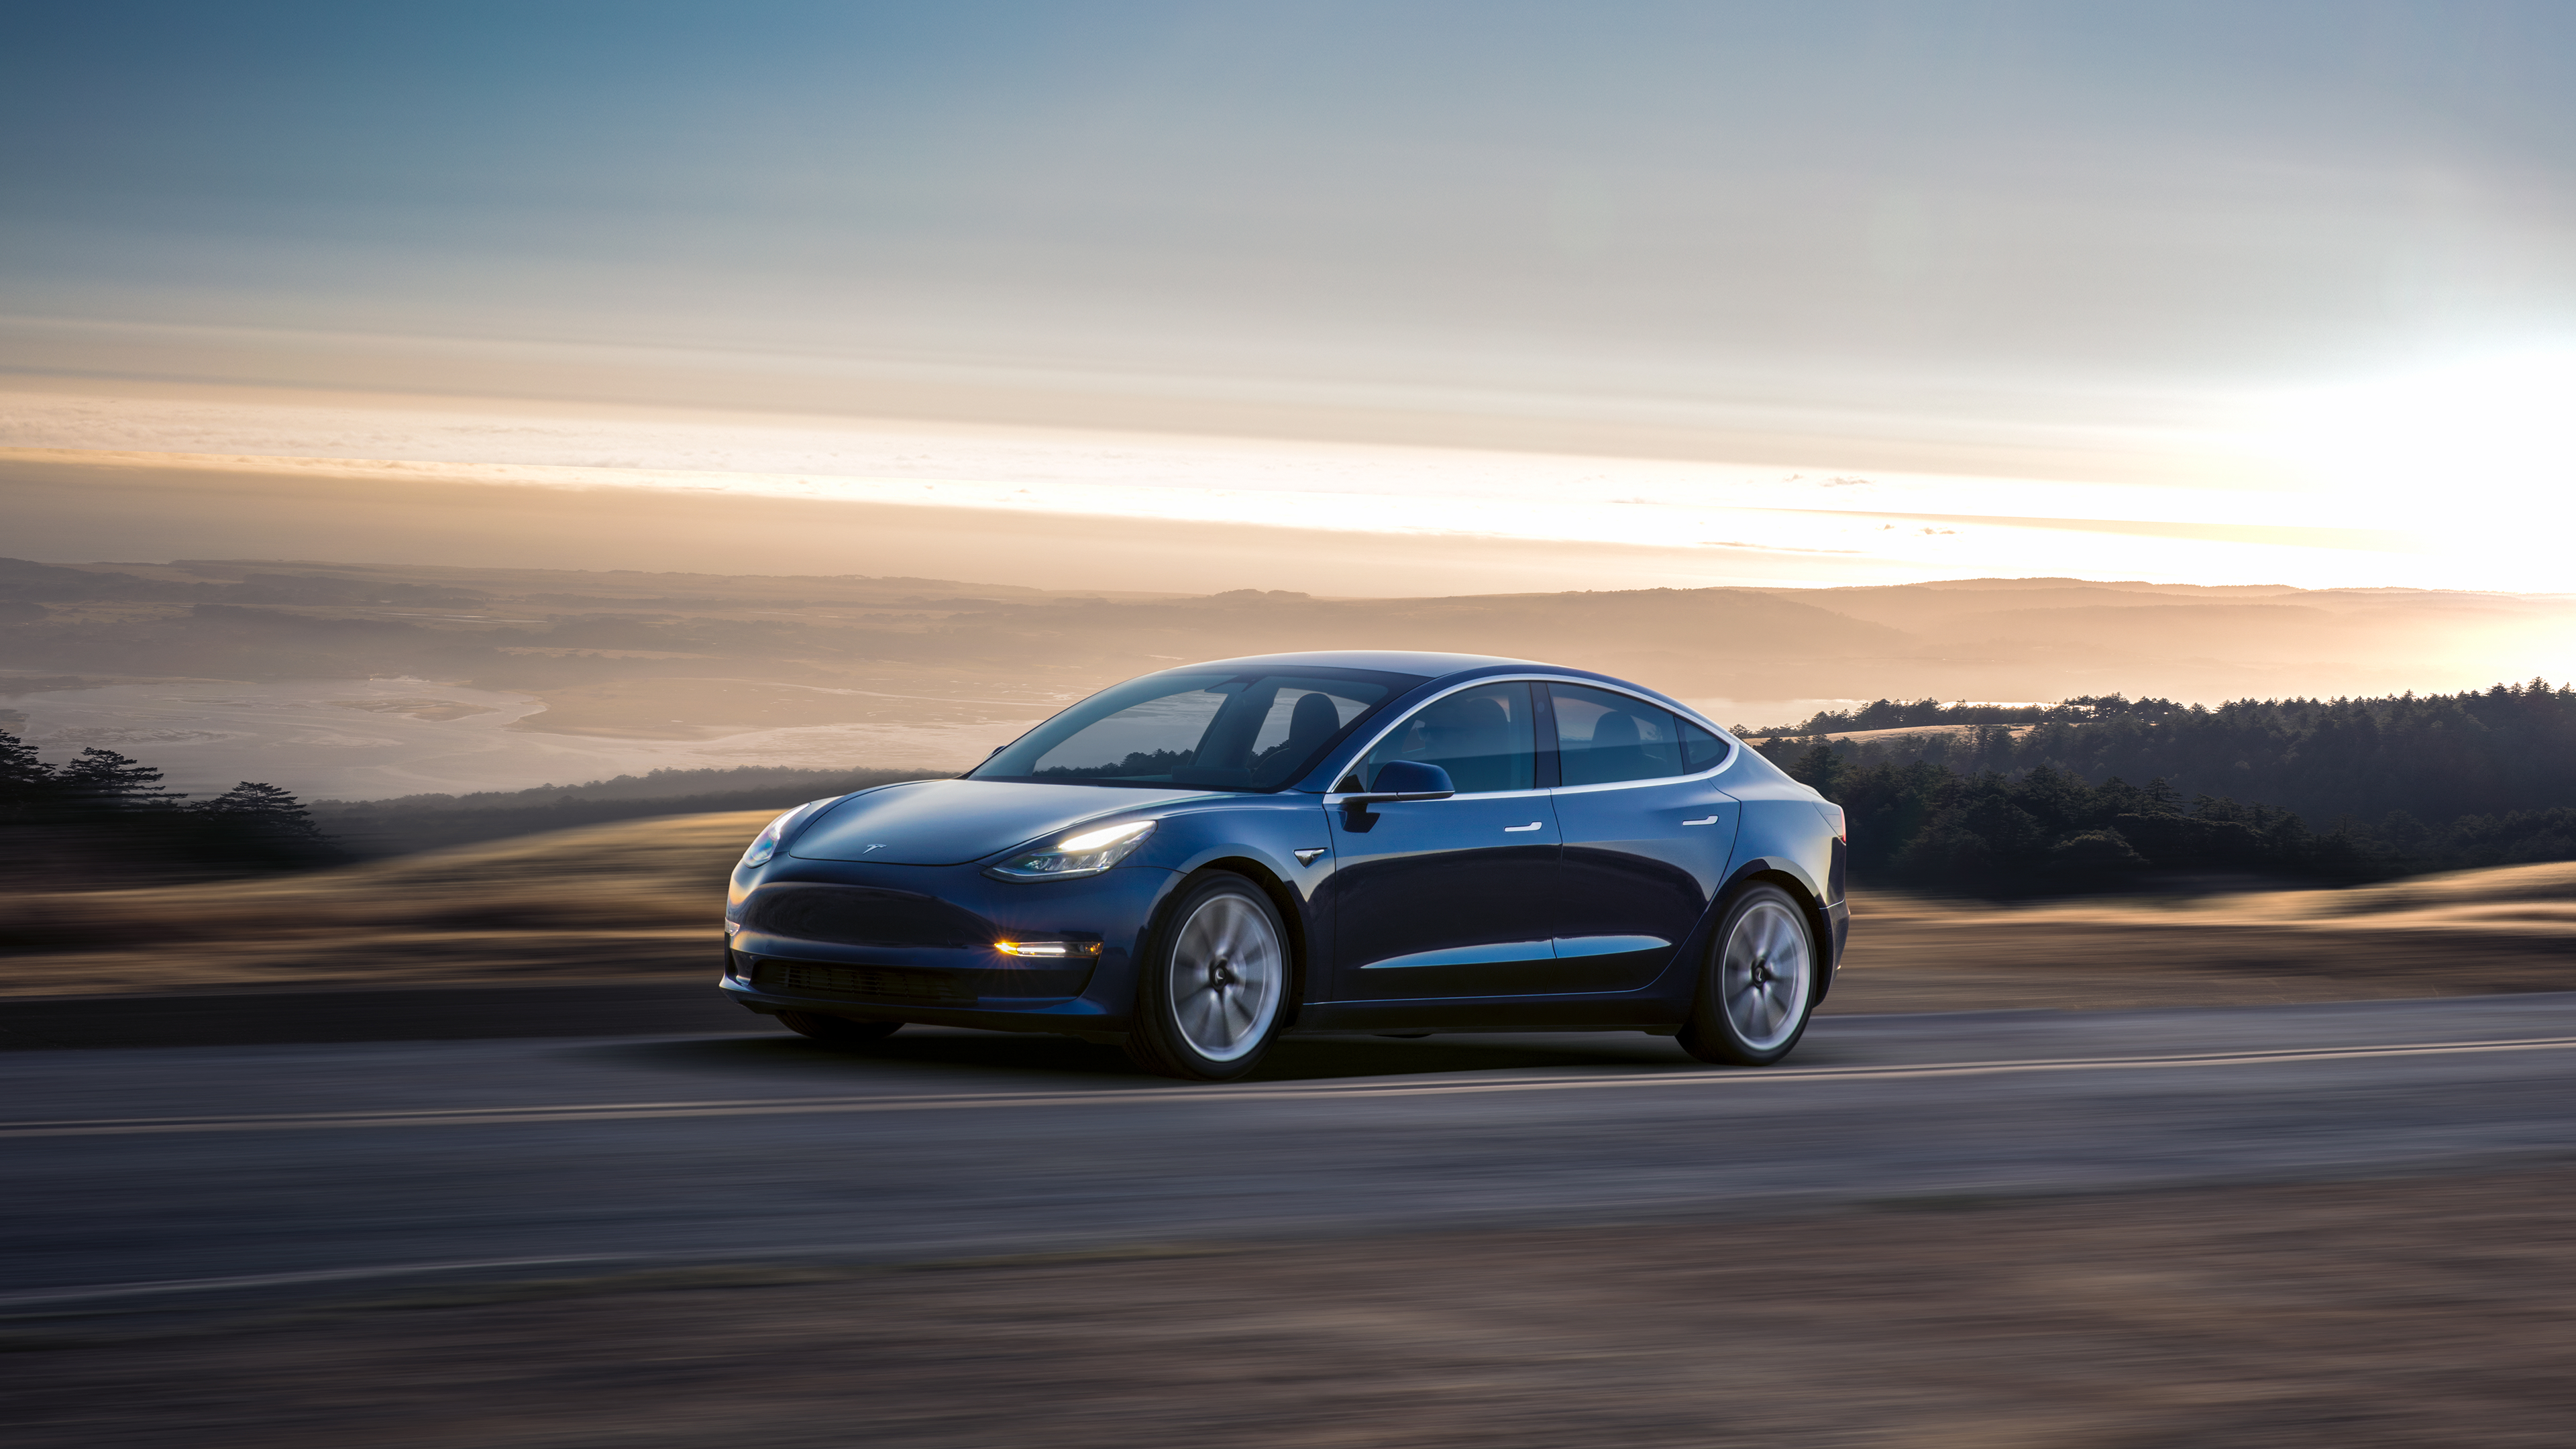 Tesla Model 3 Surpasses VW ID.3 In Germany, Becomes Country's No. 2 EV Bestseller In February